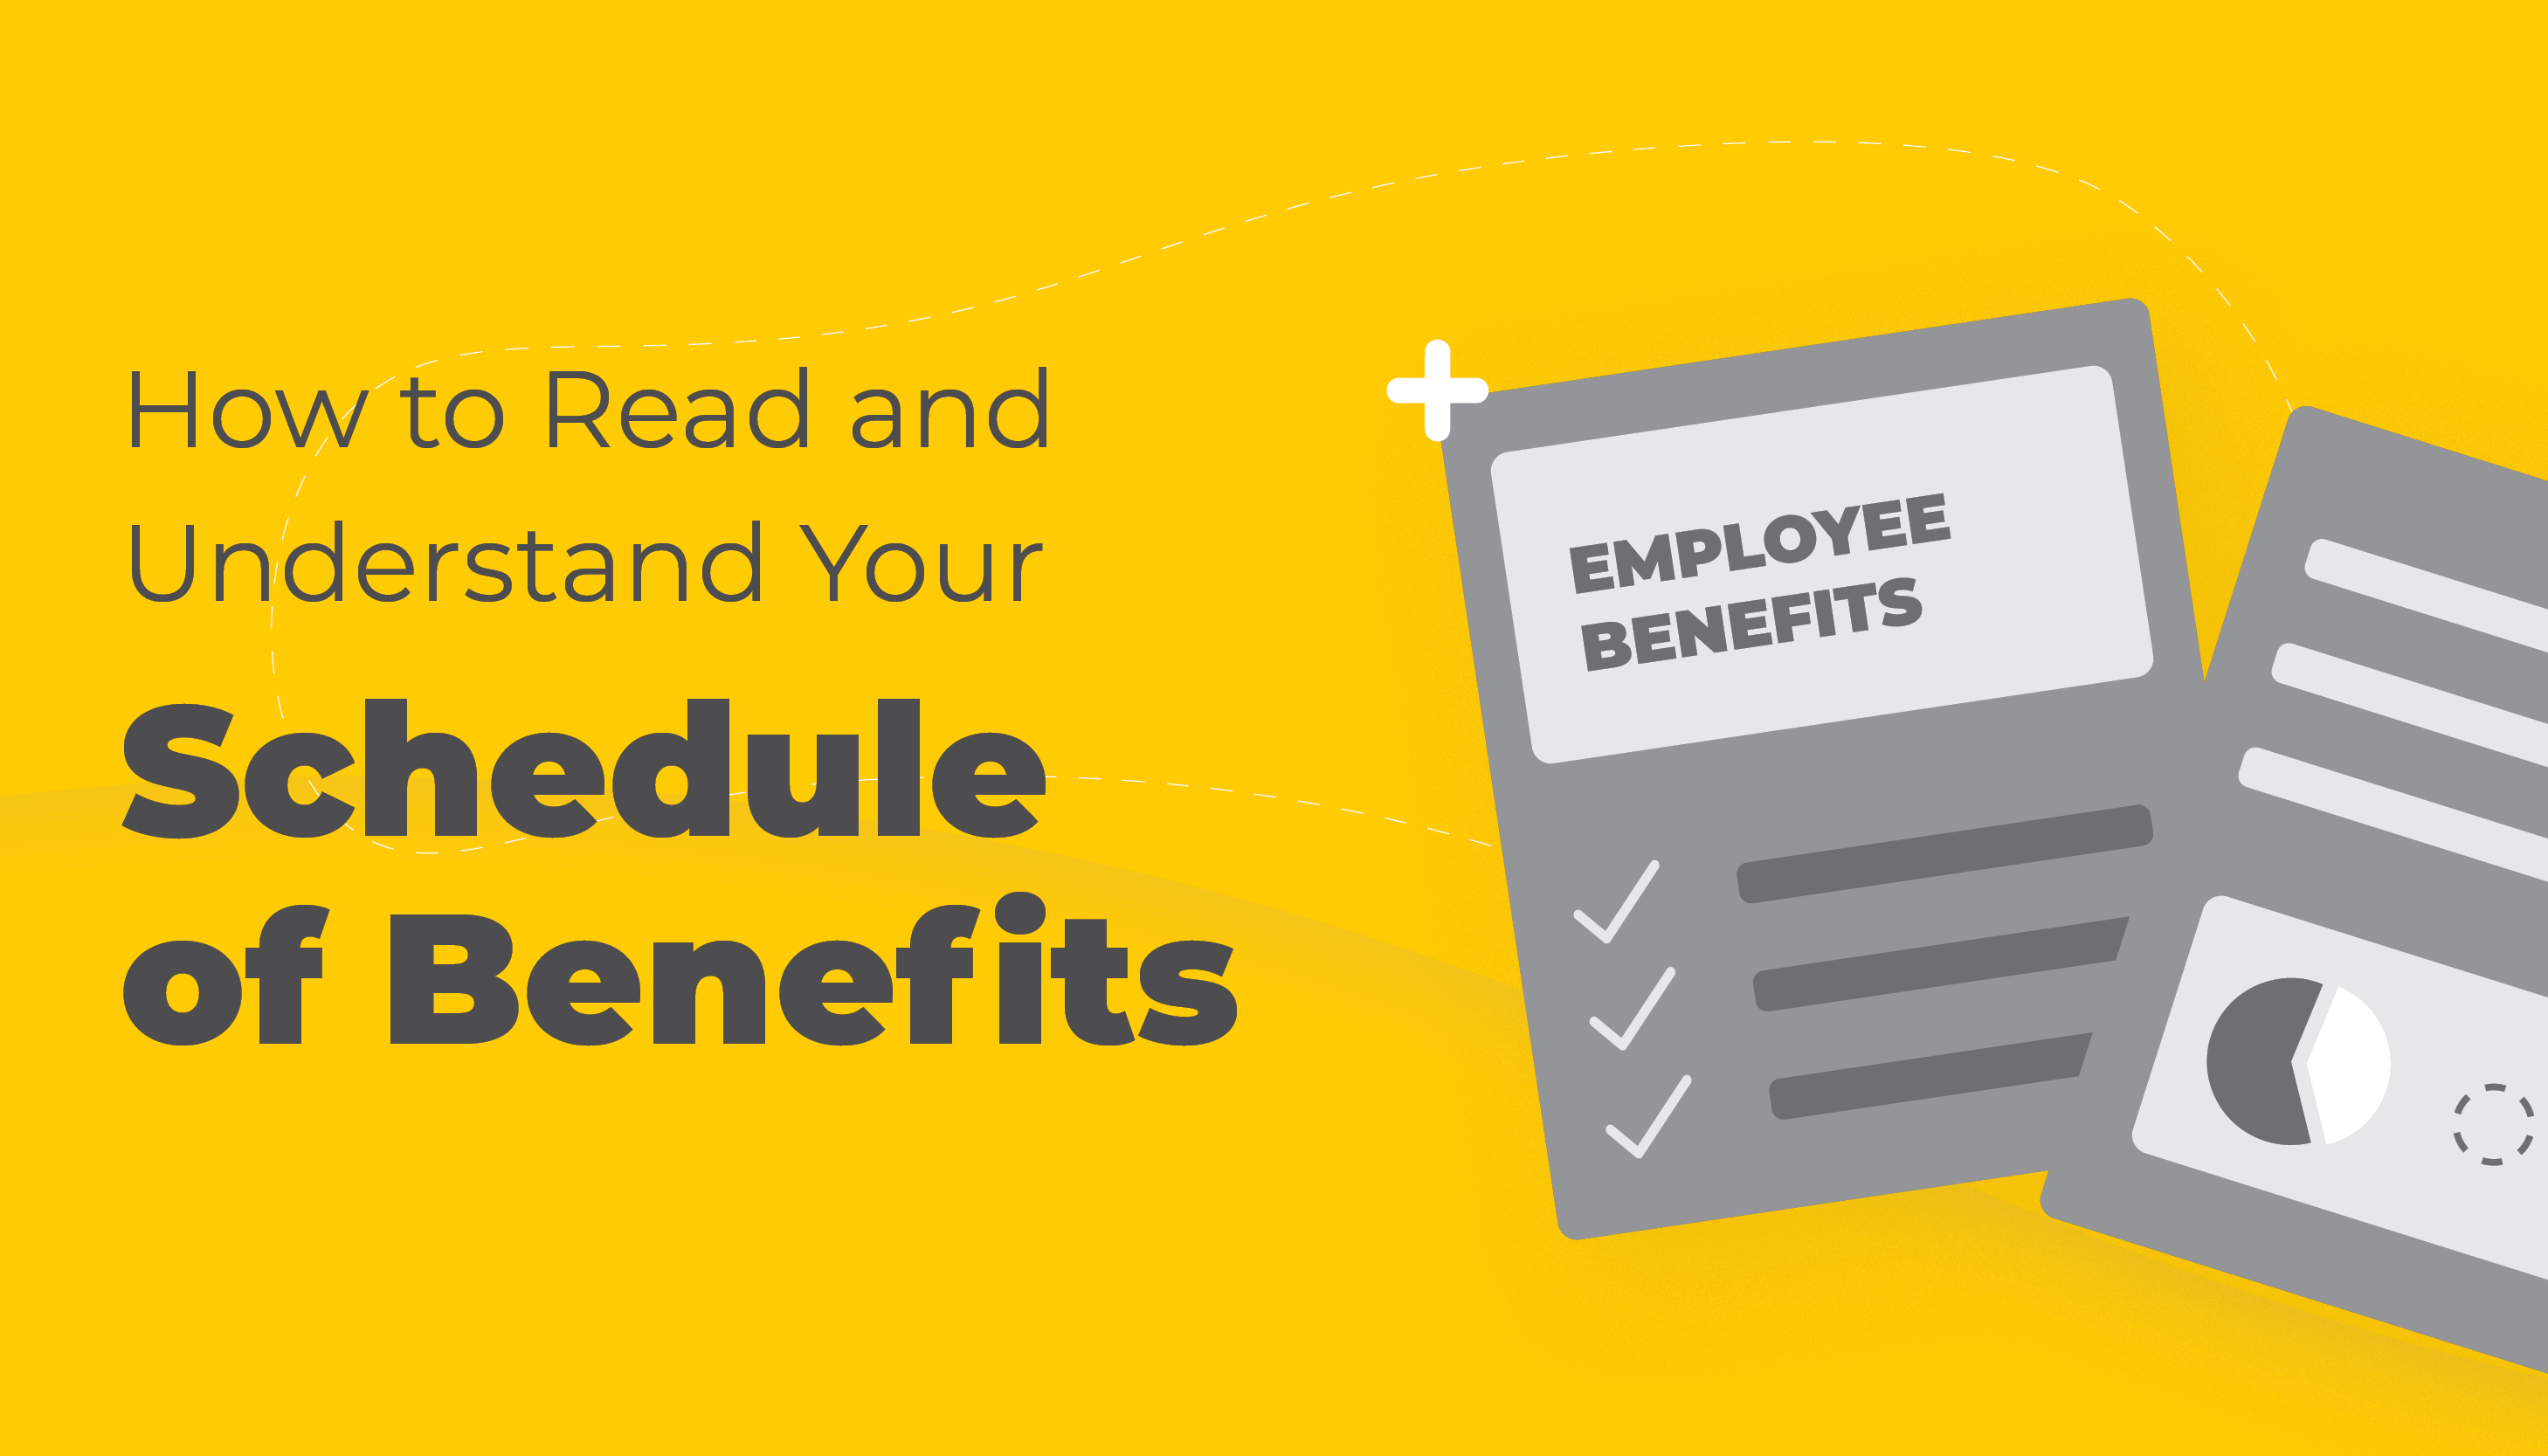 How to Read and Understand Your Schedule of Benefits | Benefits by Design